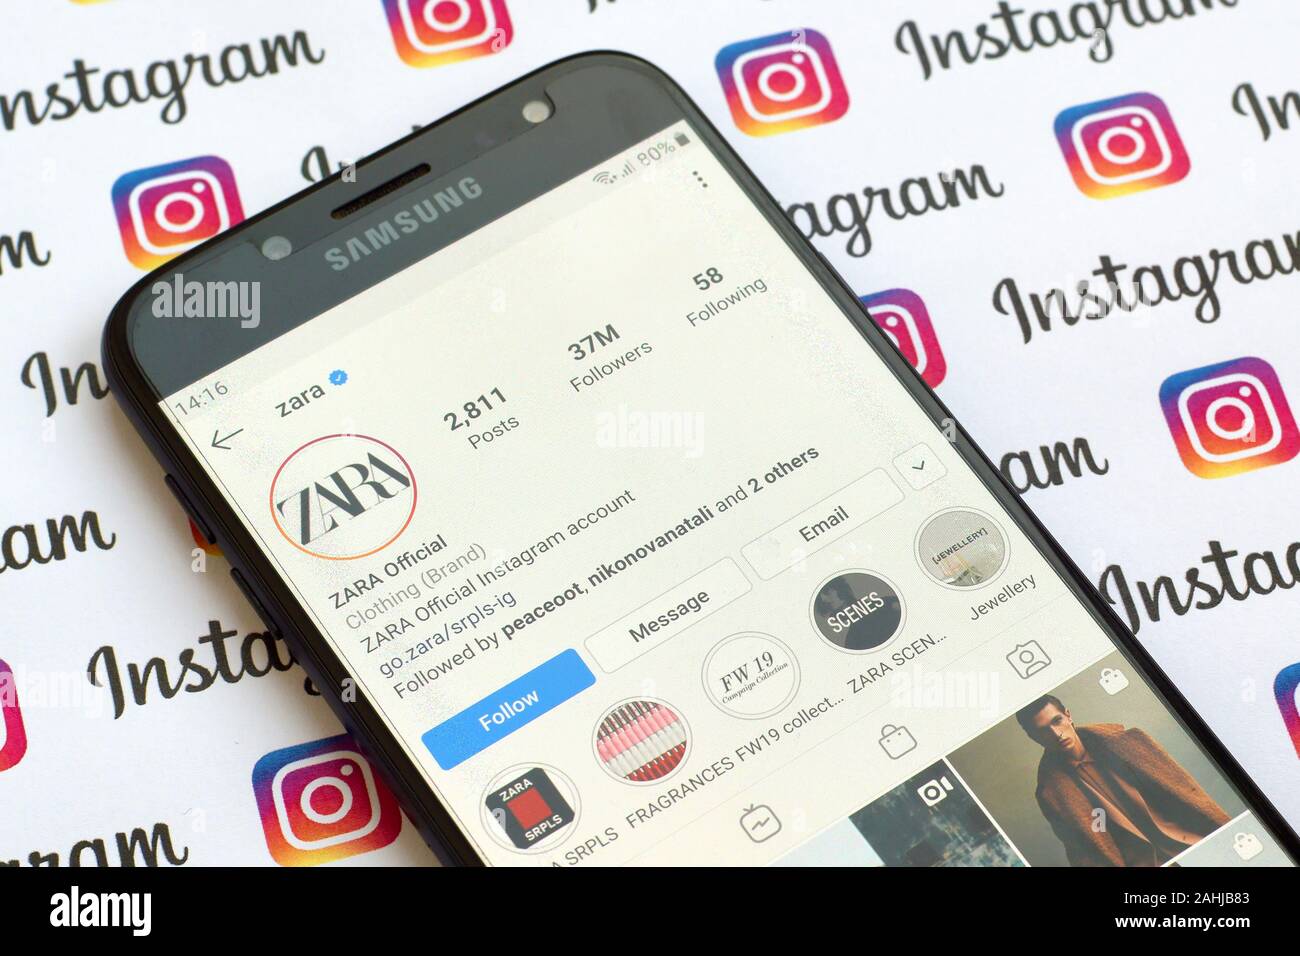 NY, USA - DECEMBER 4, 2019: Zara official instagram account on smartphone  screen on paper instagram banner Stock Photo - Alamy